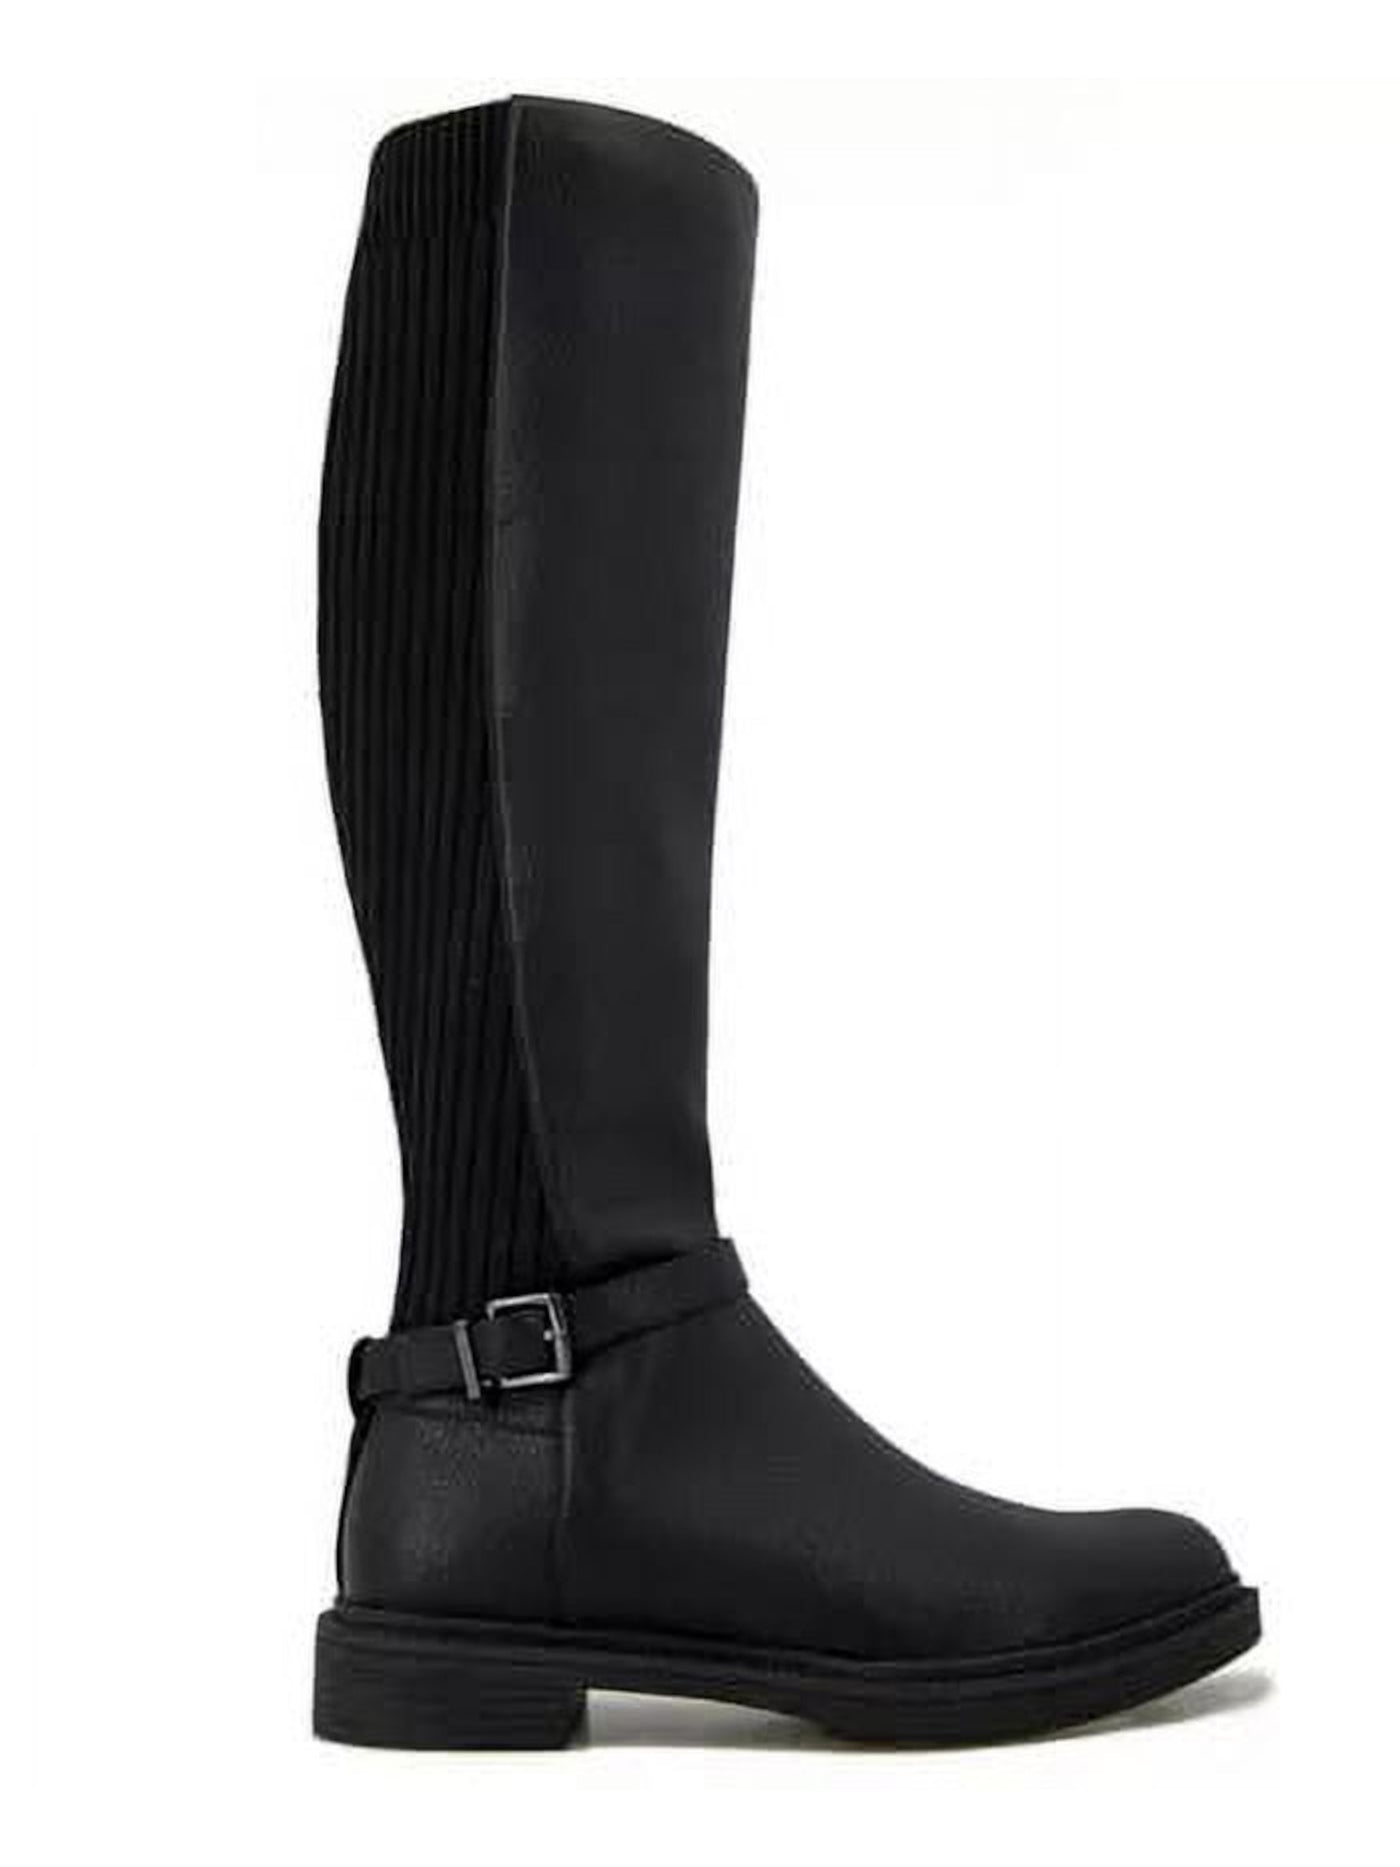 KENNETH COLE Womens Black Buckle Accent Lug Sole Winona Round Toe Block Heel Zip-Up Riding Boot 7.5 M